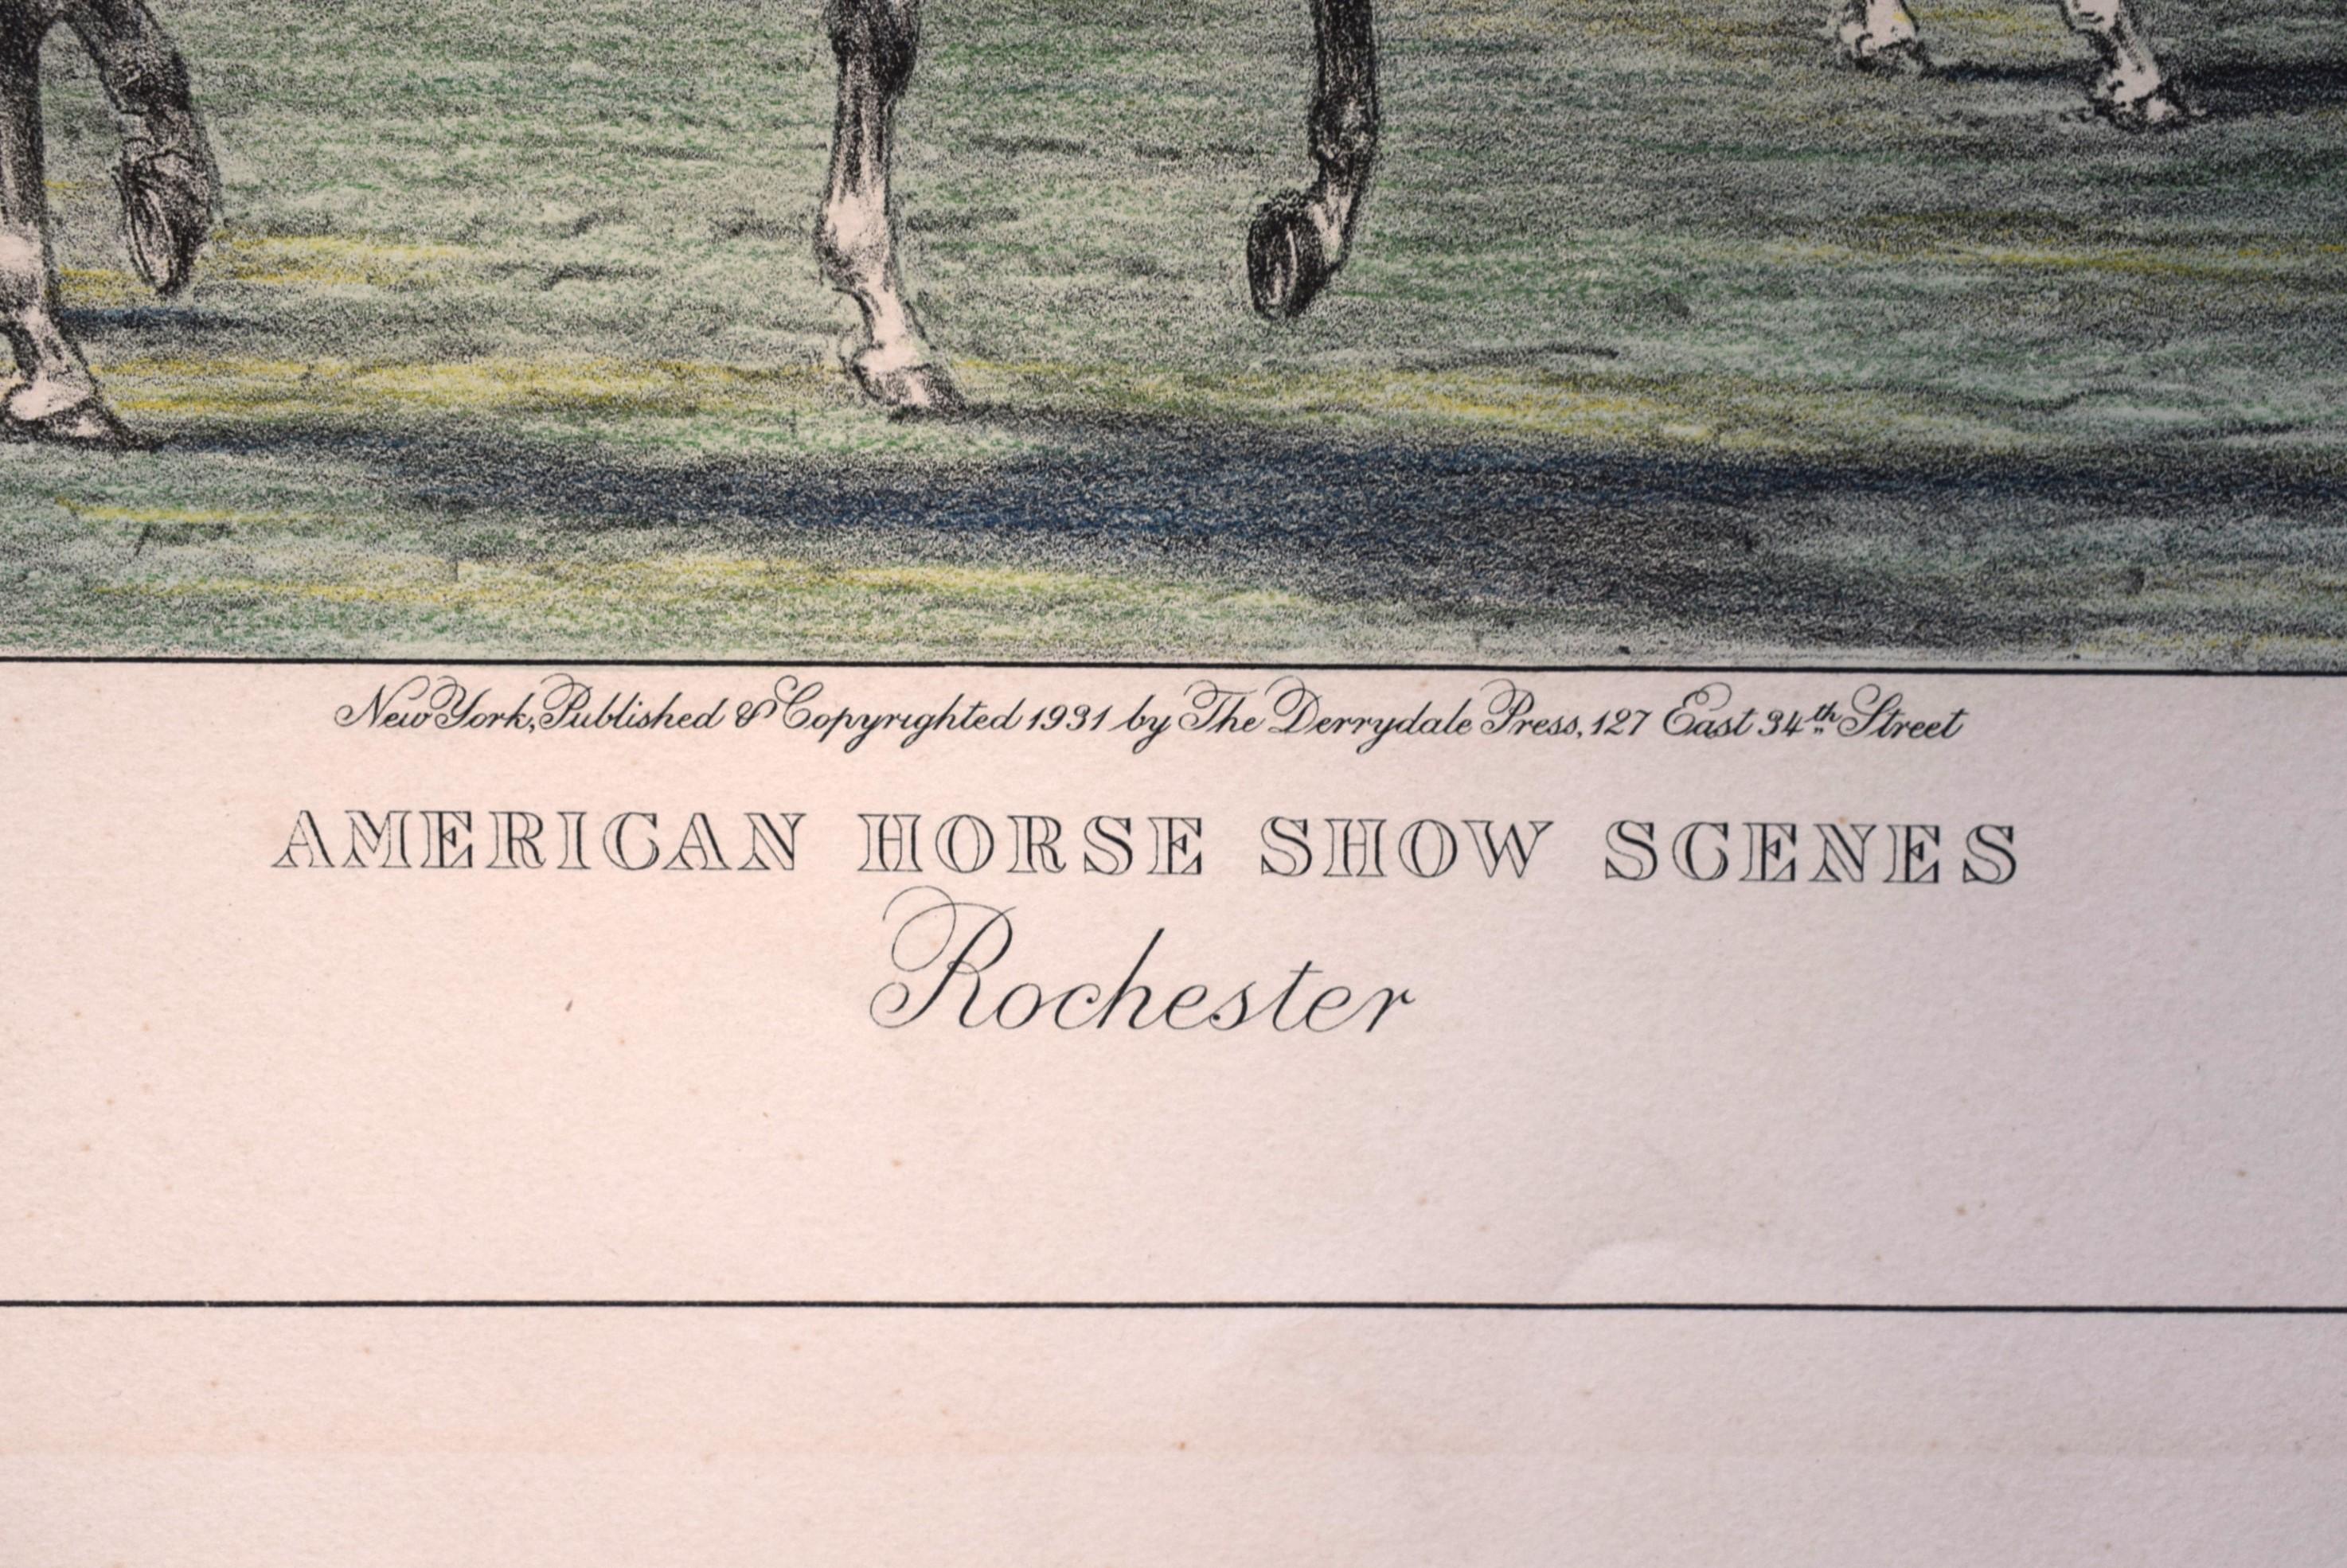 Edward King Lithographie „American Horse Show Scenes, Rochester“, Edward King im Angebot 1